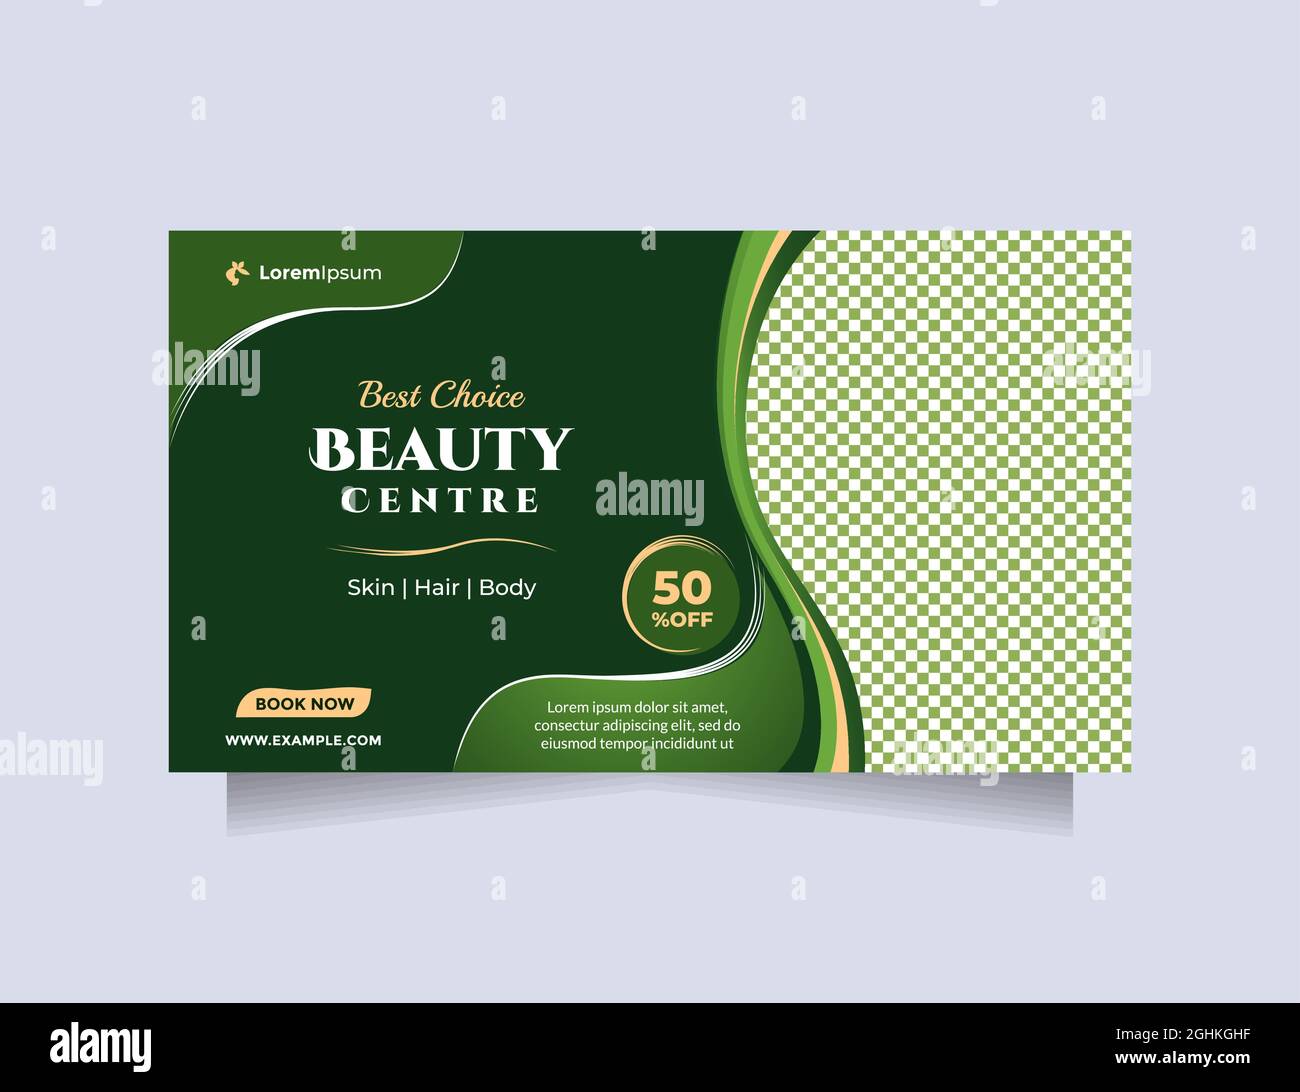 Clean and modern beauty center social media post & banner template. Concept of professional hair beauty treatment, hair salon, something natural, etc Stock Vector